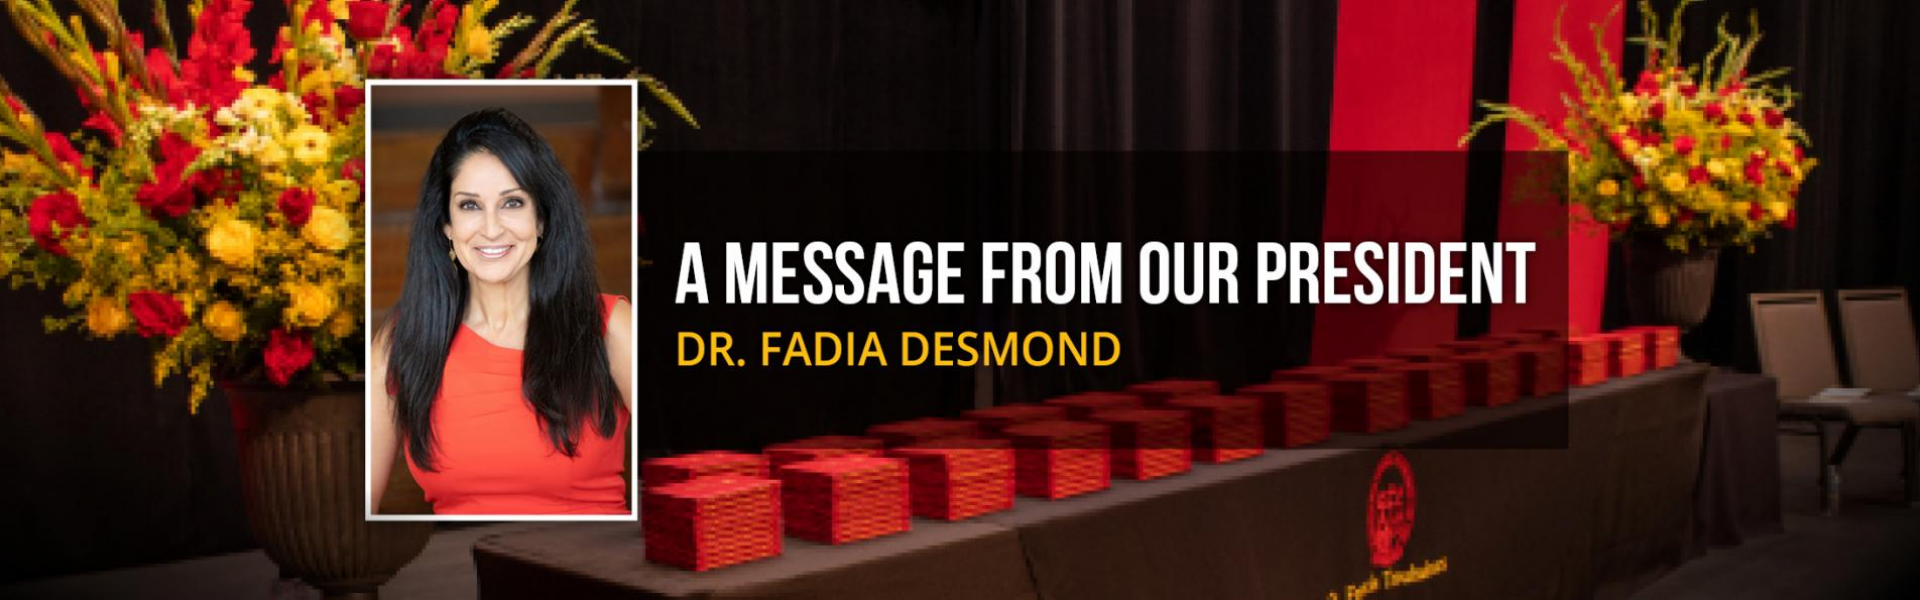 A Message from our president Dr. Fadia Desmond